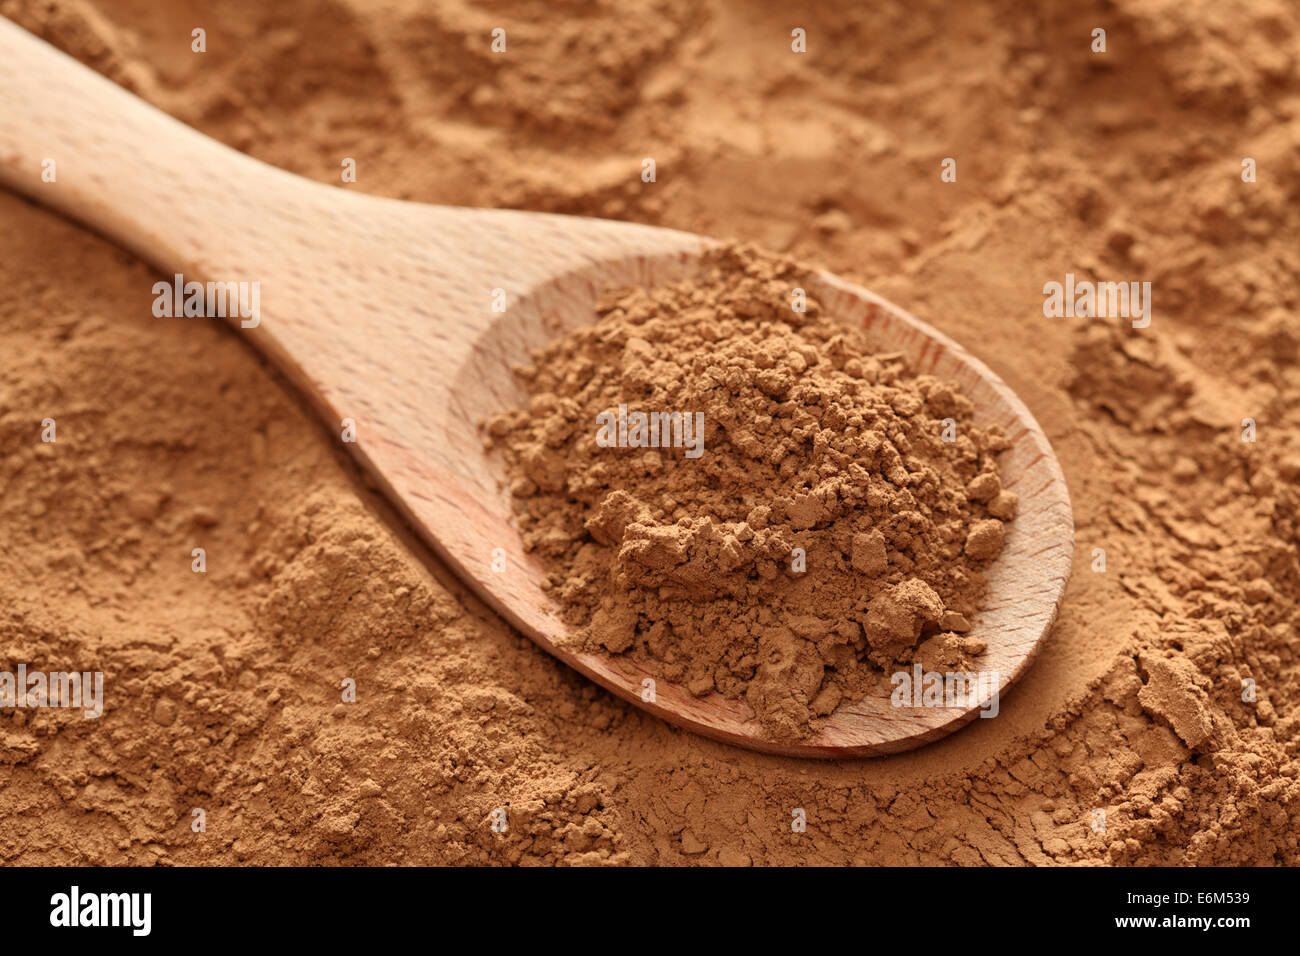 Cocoa powder in a wooden spoon on cocoa powder background. Closeup. Stock Photo